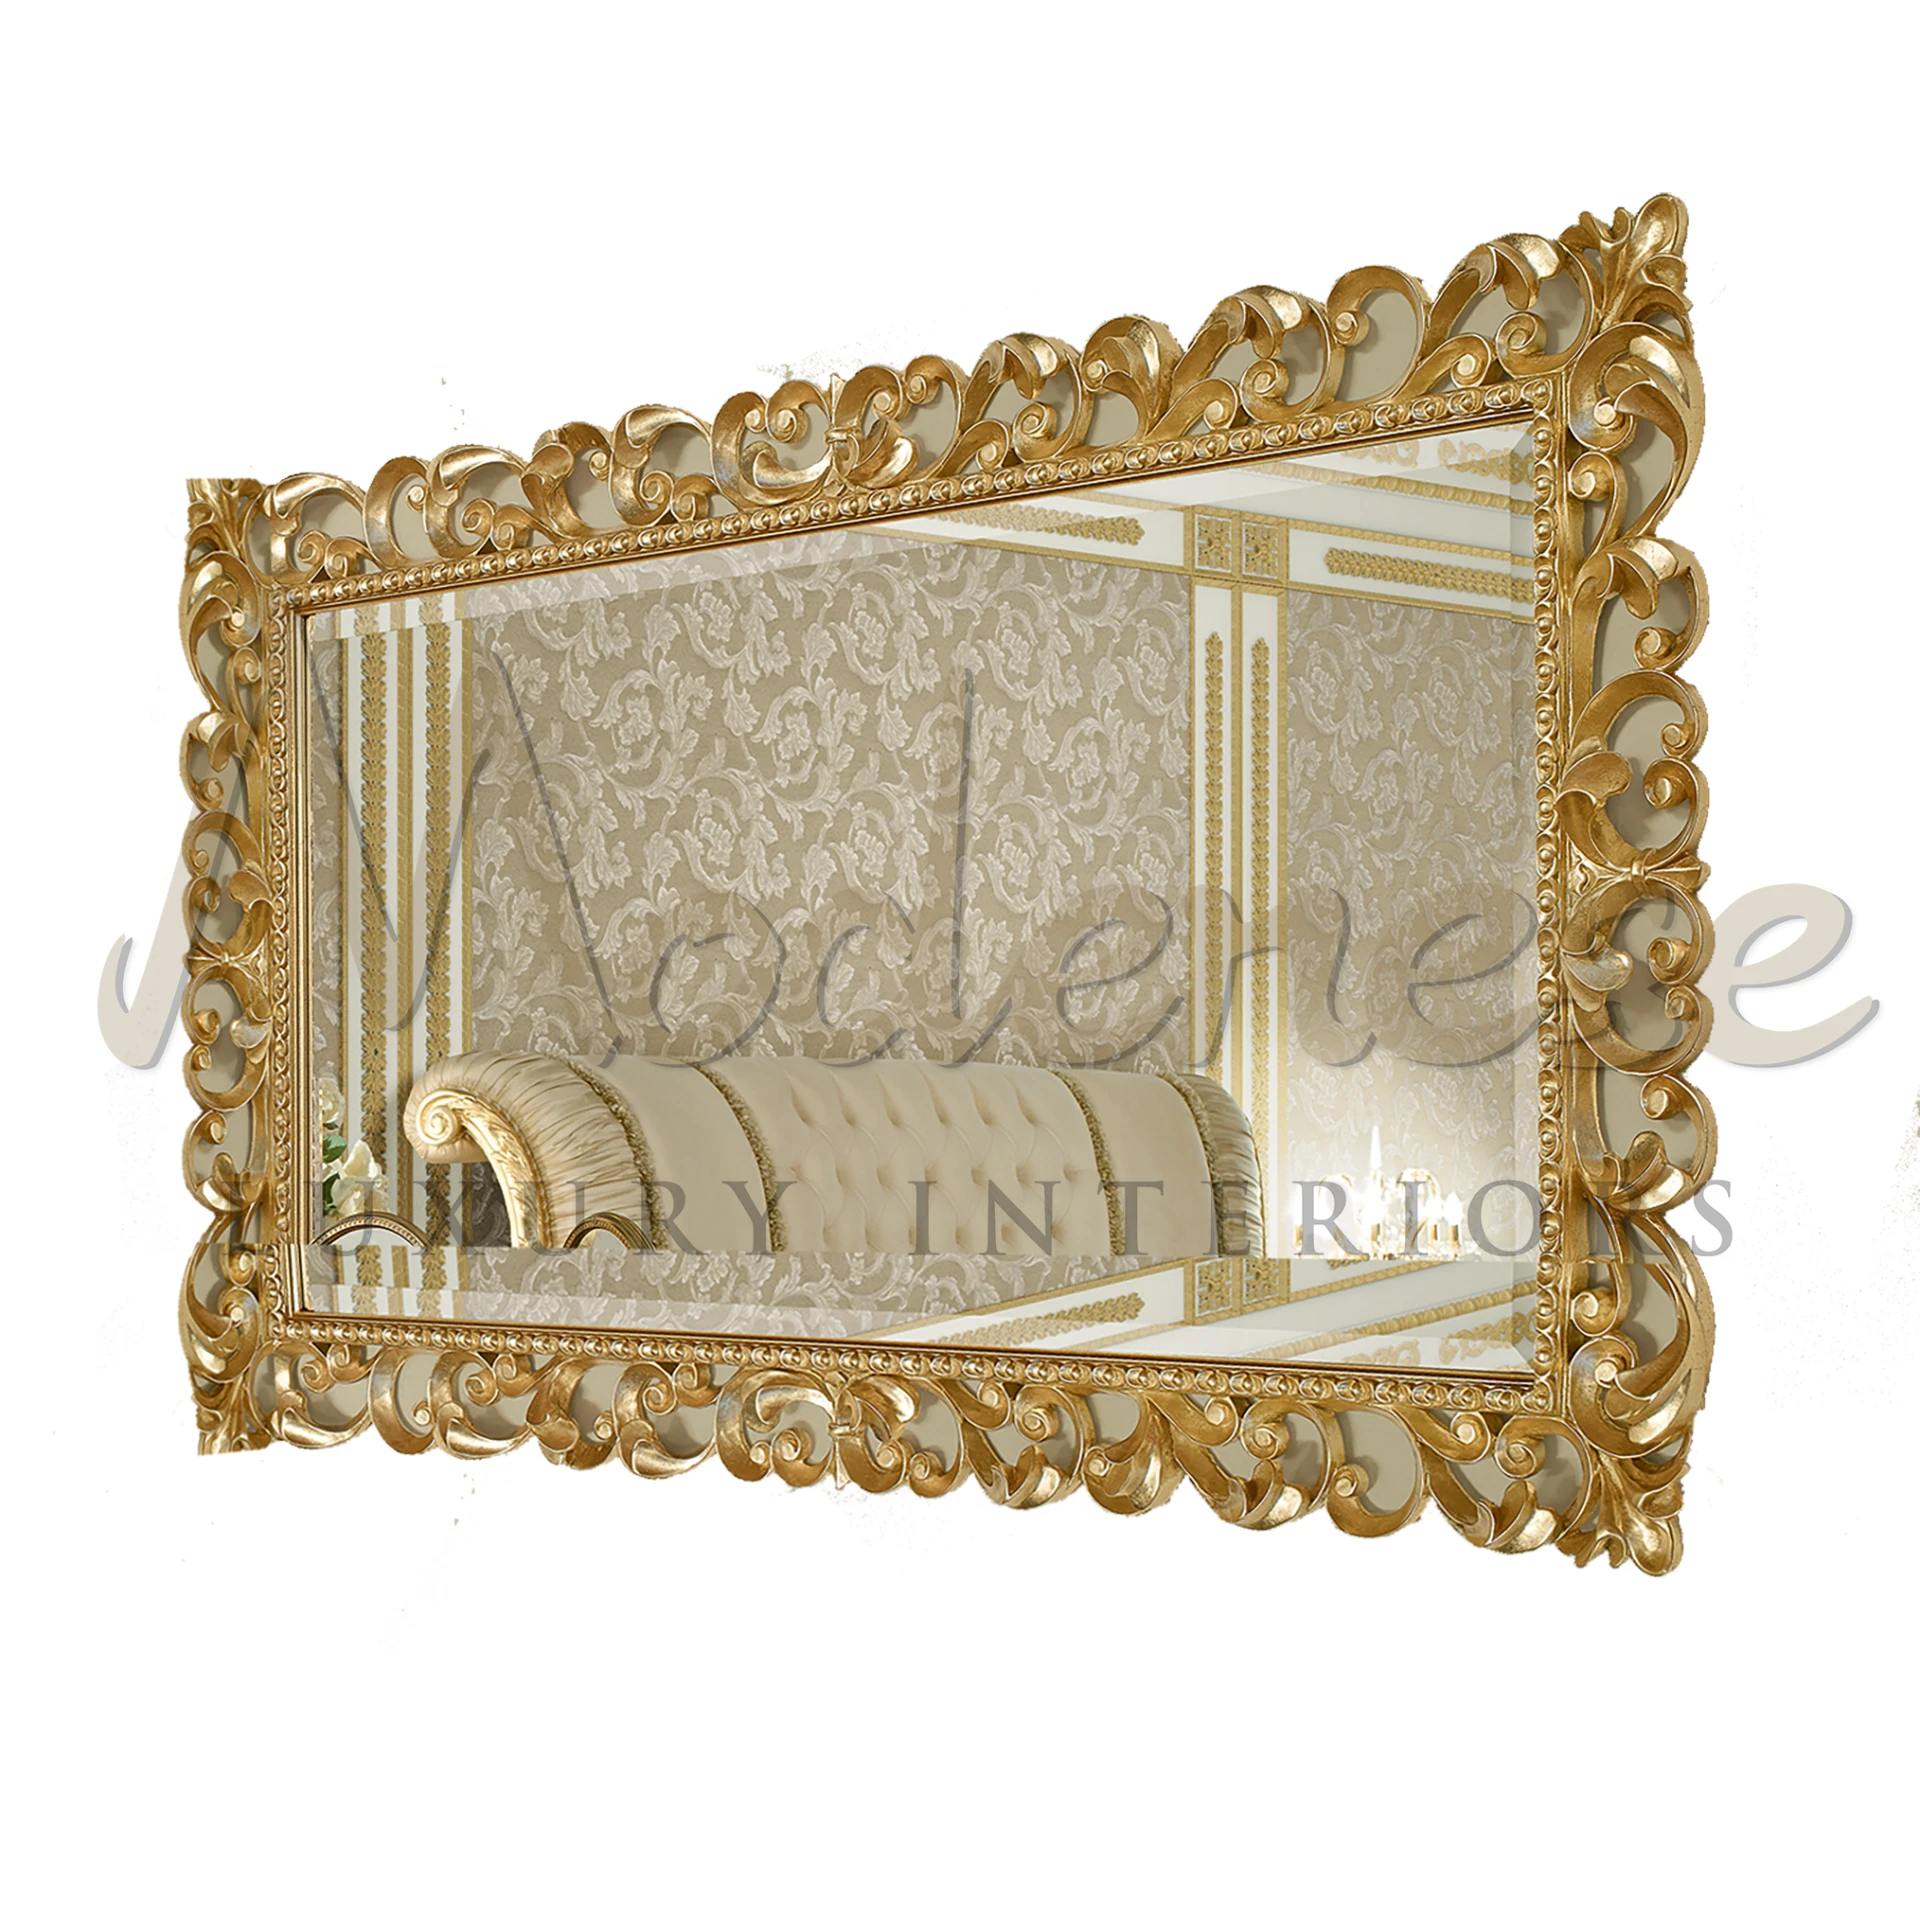 Exquisite hand-carved mirror with gold finish, a testament to traditional craftsmanship and classic style.